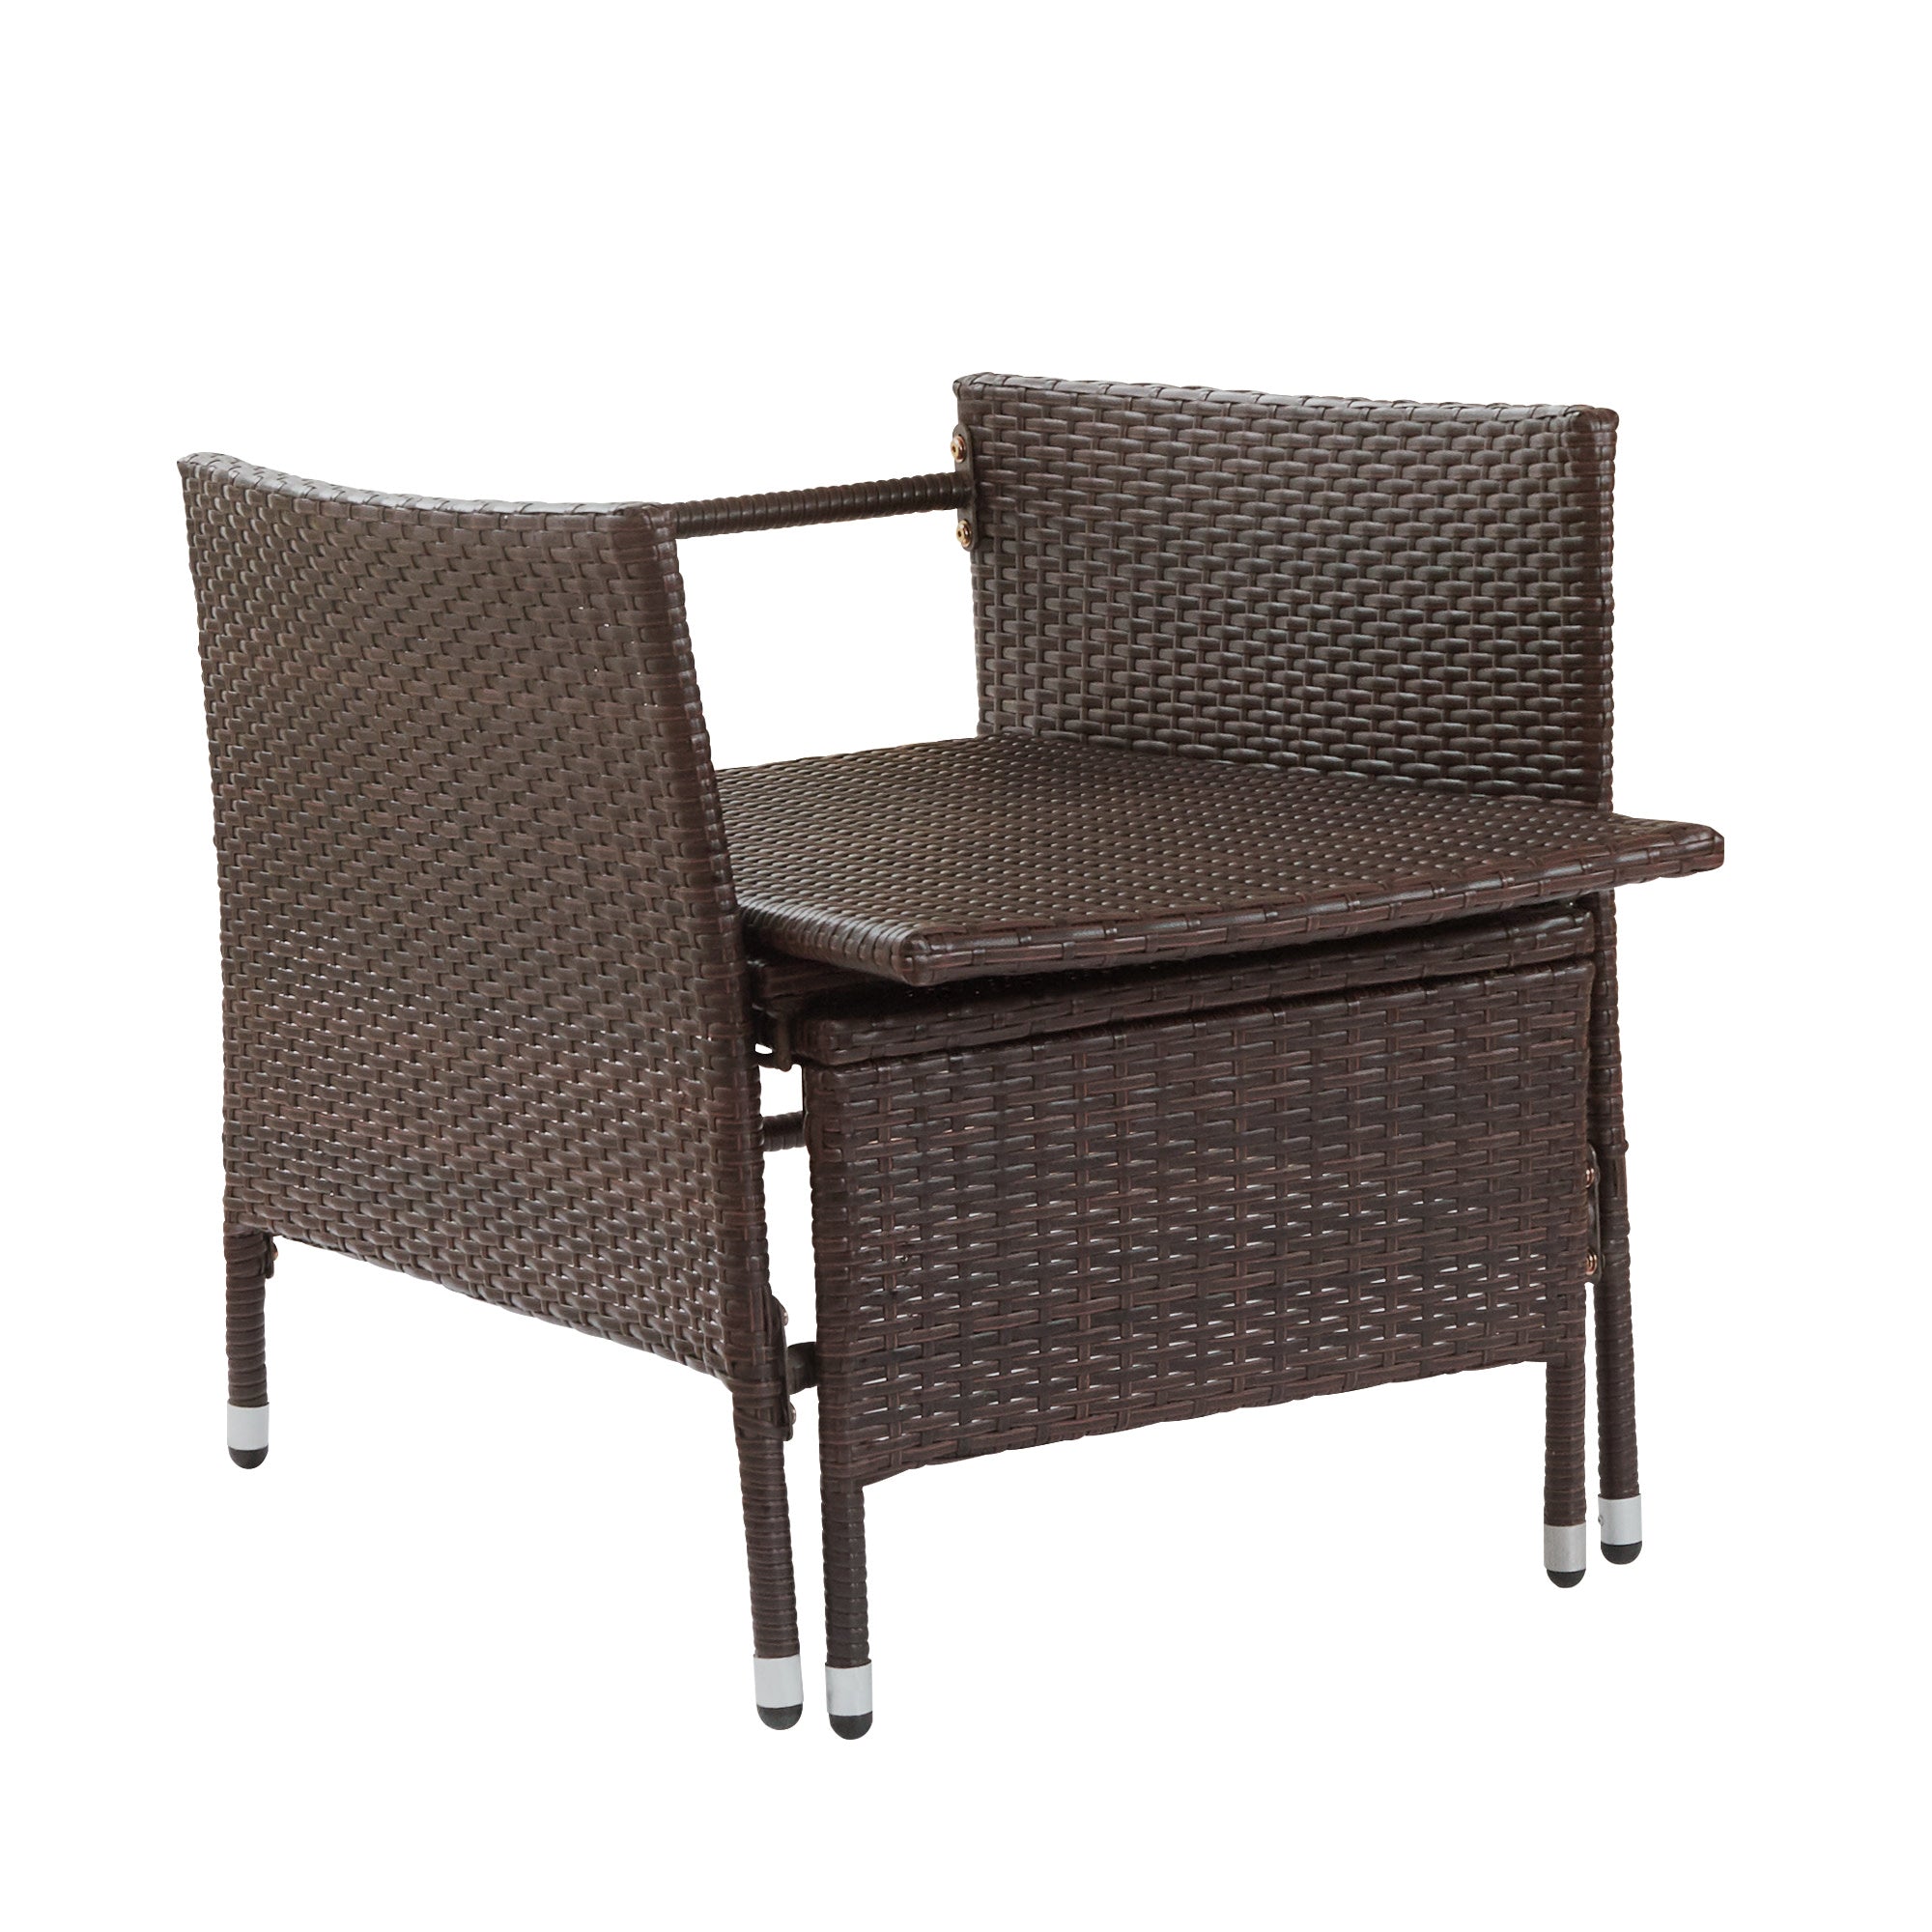 Teamson Home Outdoor Rattan Patio Lounge Chair with Pull-Out Ottoman and Cushions, Brown/White